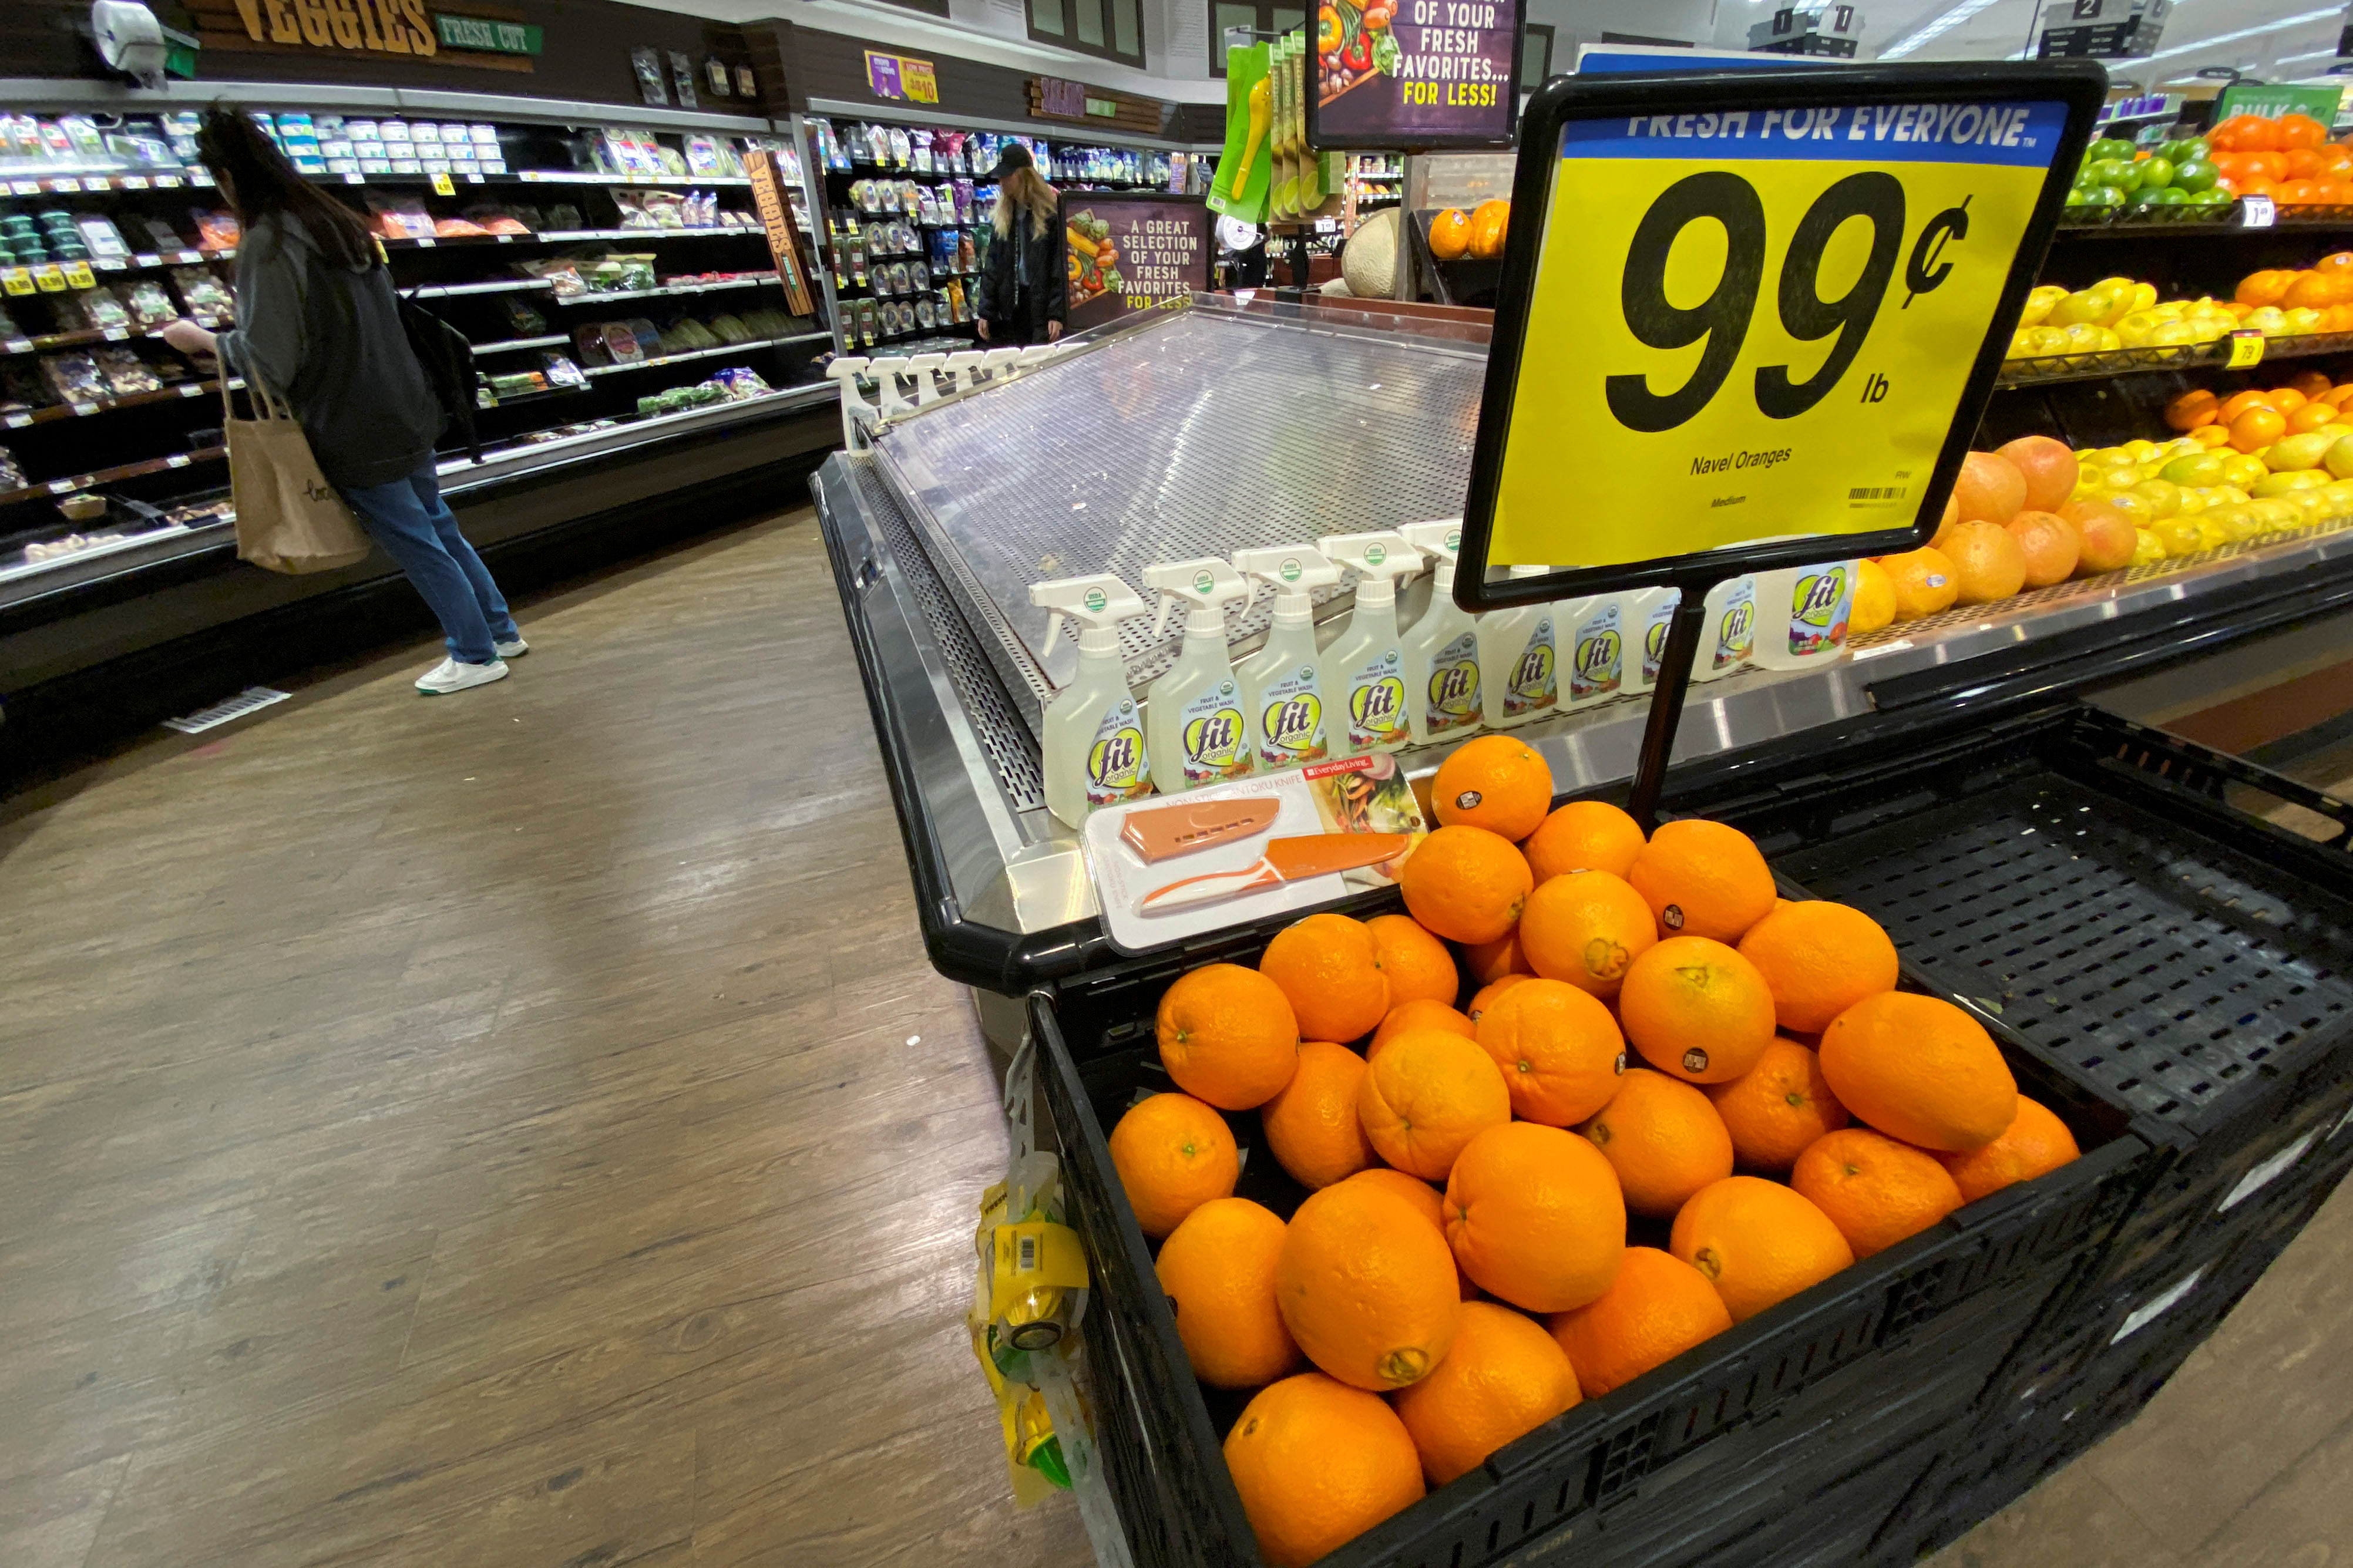 Oranges are displayed for sale at the produce area as a customer browses grocery store shelves inside Kroger Co.'s Ralphs supermarket amid fears of the global growth of coronavirus cases, in Los Angeles